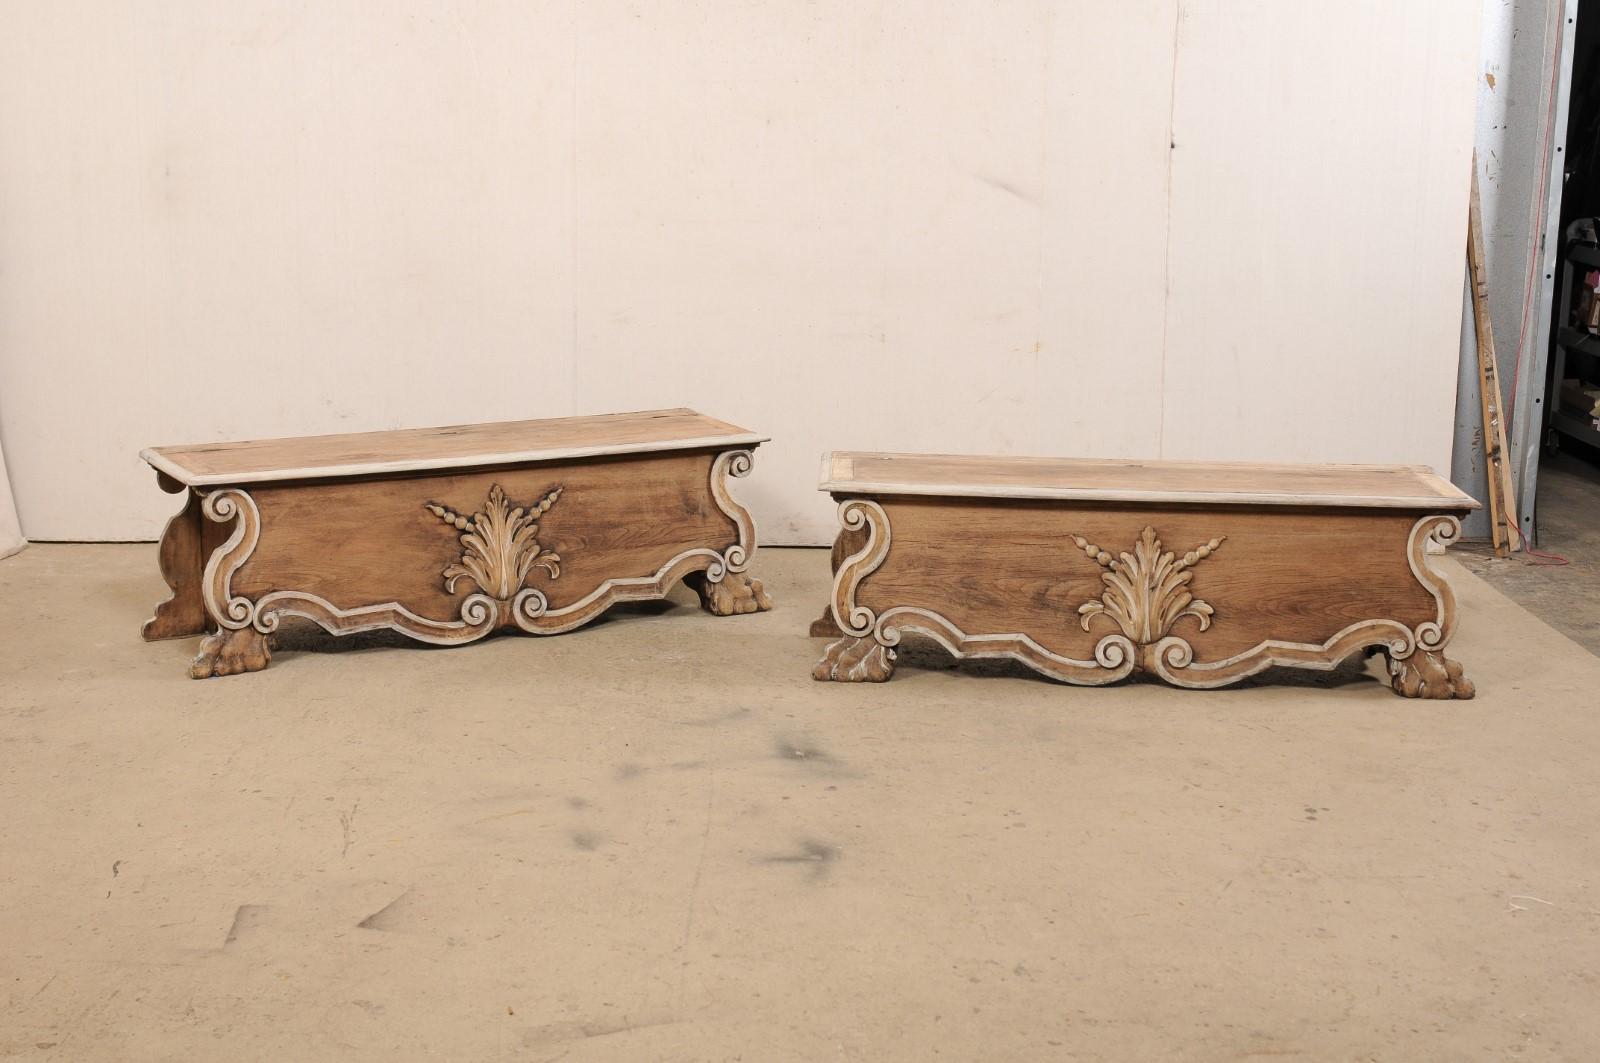 An Italian pair of Baroque-style carved-wood benches with storage from the 19th century. This antique pair of wood benches from Italy are each designed with Baroque influences with the rectangular-seat top overhanging a case below with shell carved